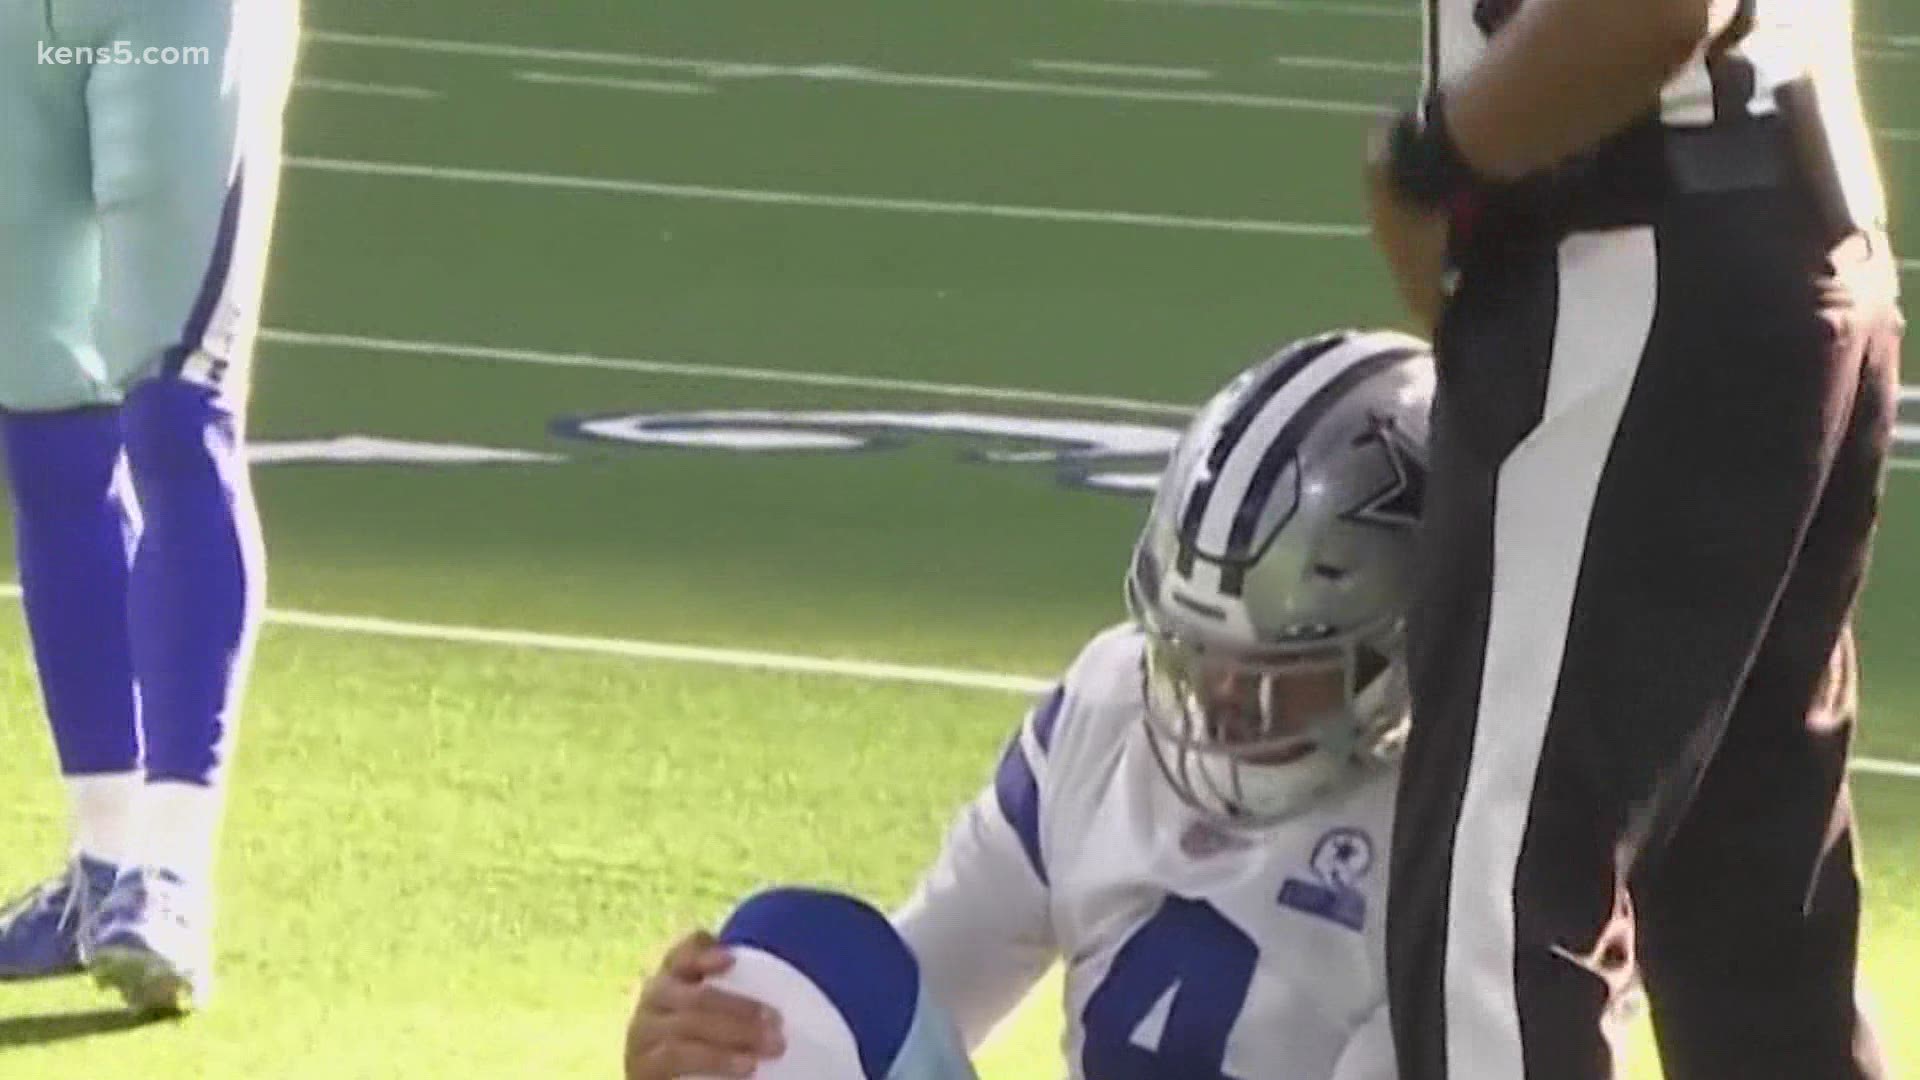 Prescott was carted off the field in Sunday's game and had surgery on his ankle later that night. When's the next time we might see him on the field?